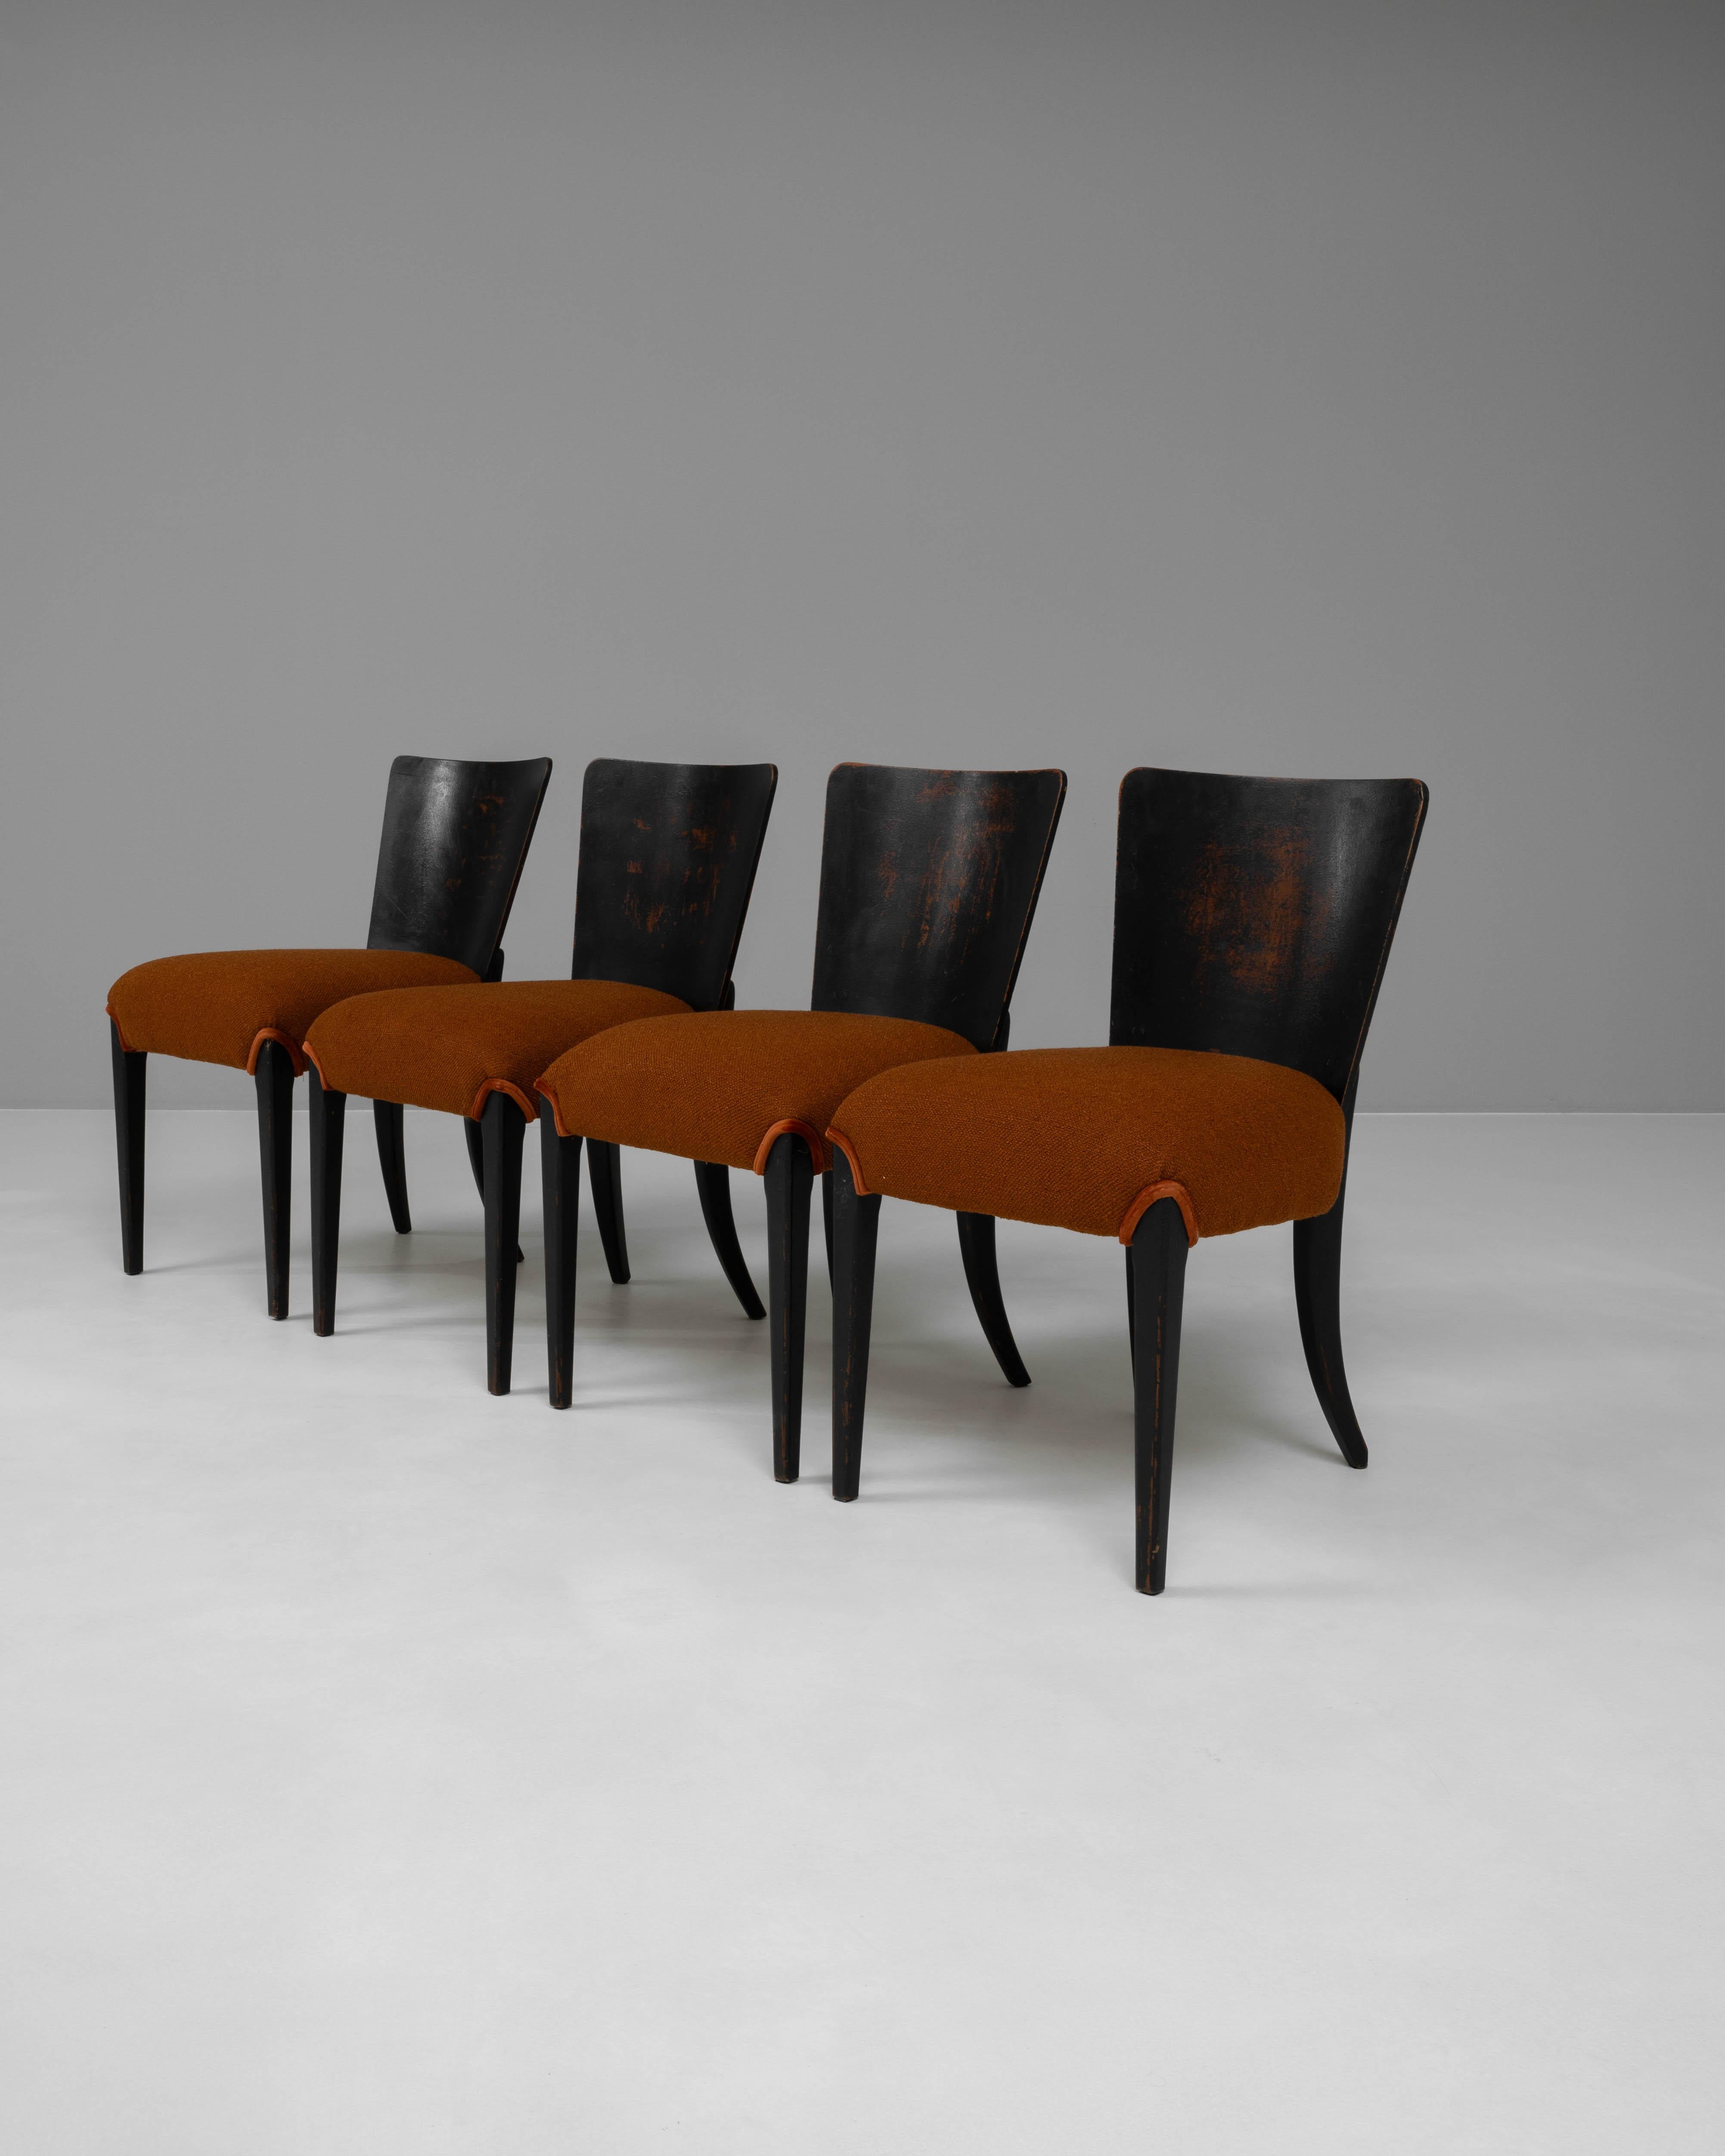 20th Century Czech Wooden Dining Chairs With Upholstered Seats By J. Halabala 9